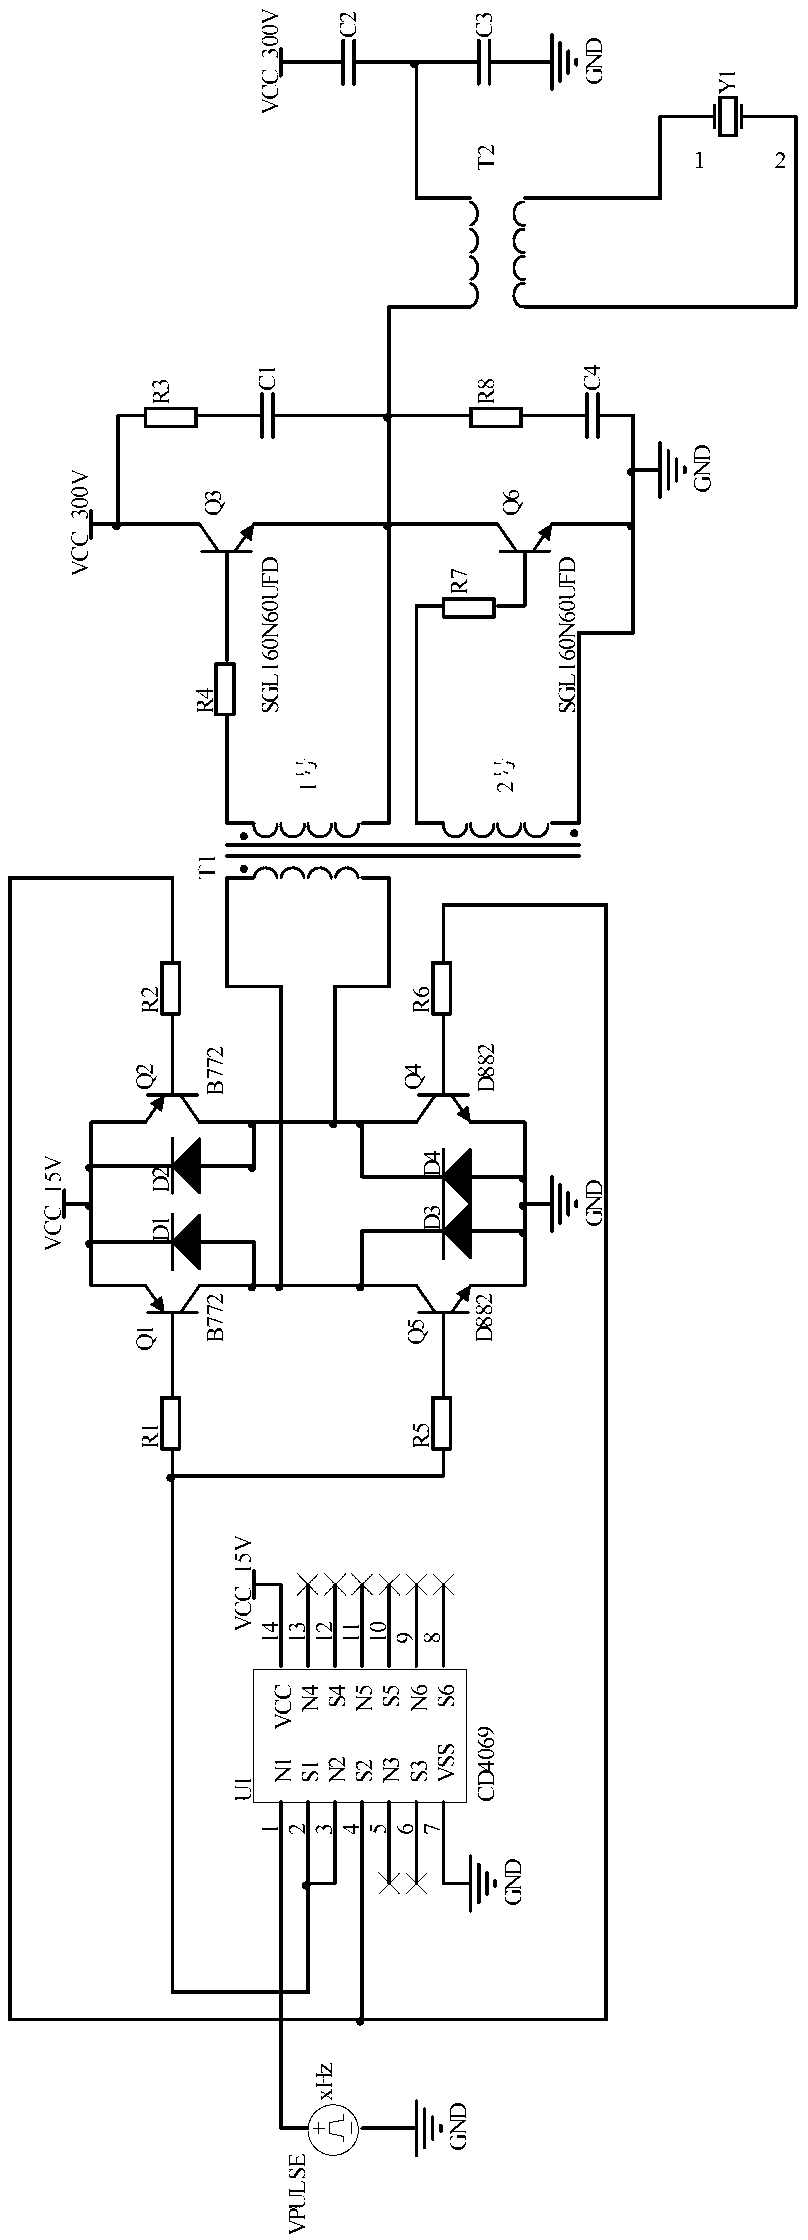 Circuit for driving high-power ultrasonic transducer by one square wave